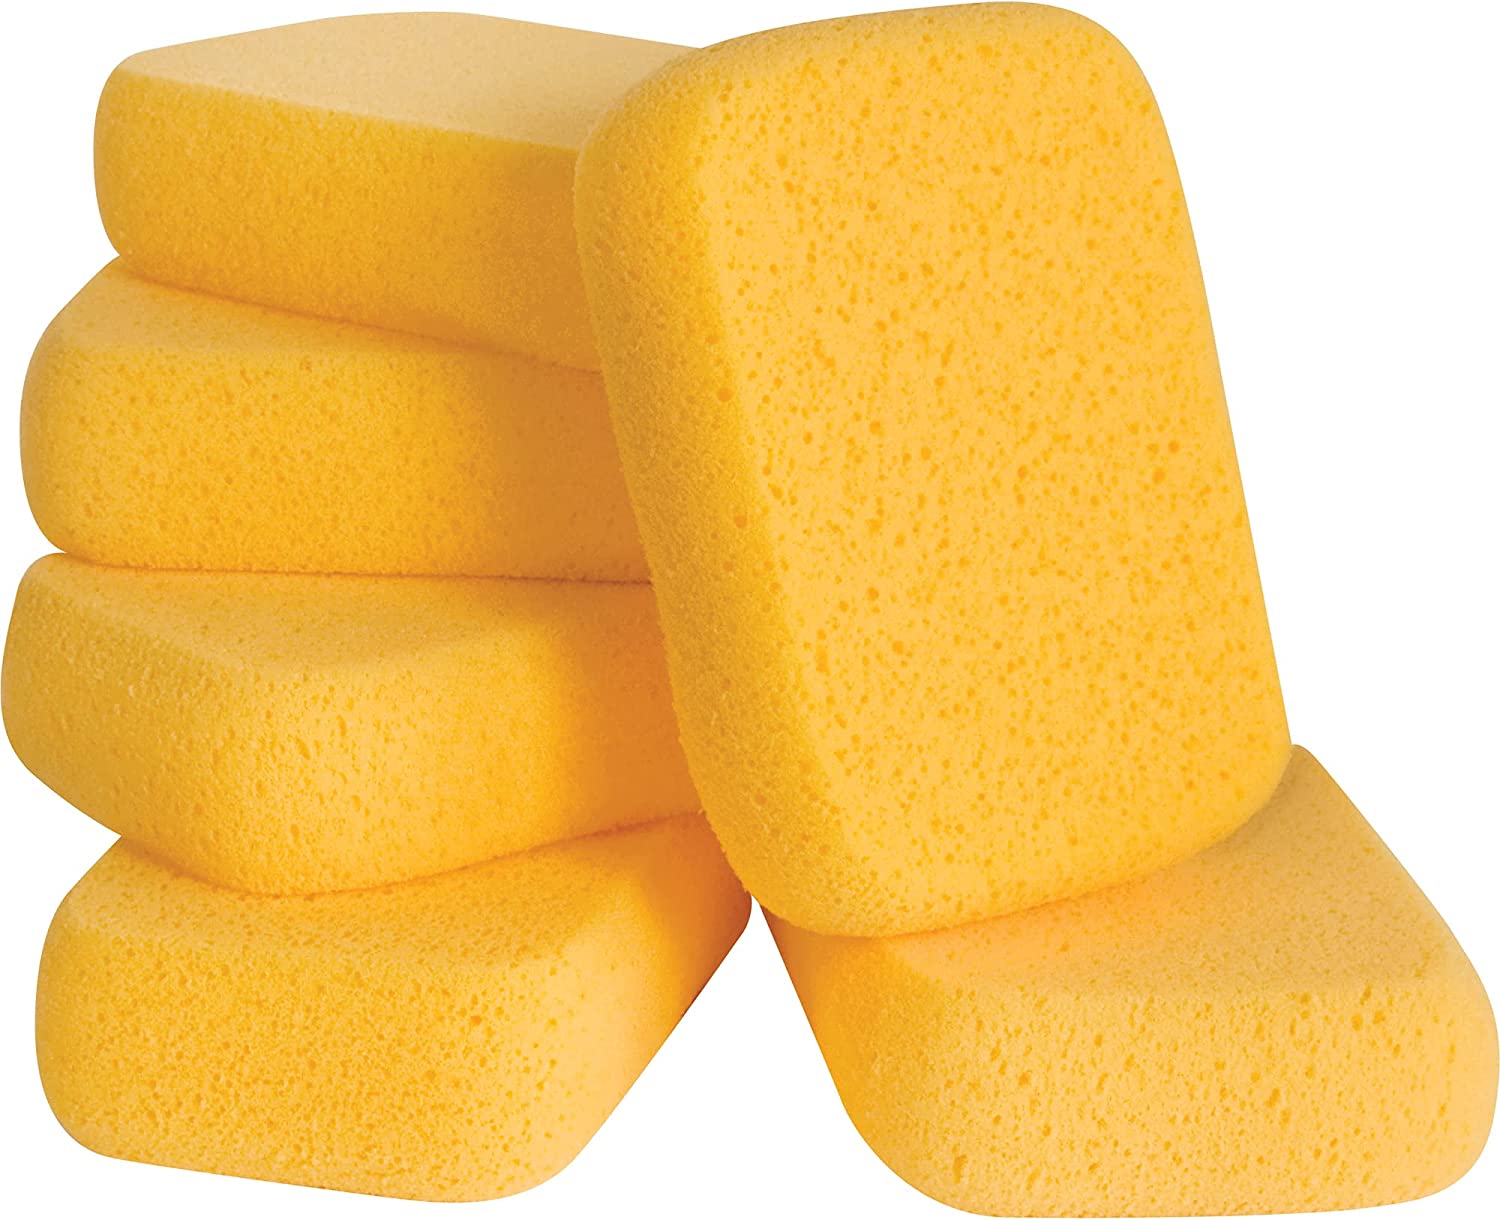 QEP Rounded Corner Professional Cleaning Sponges, 6-Pack